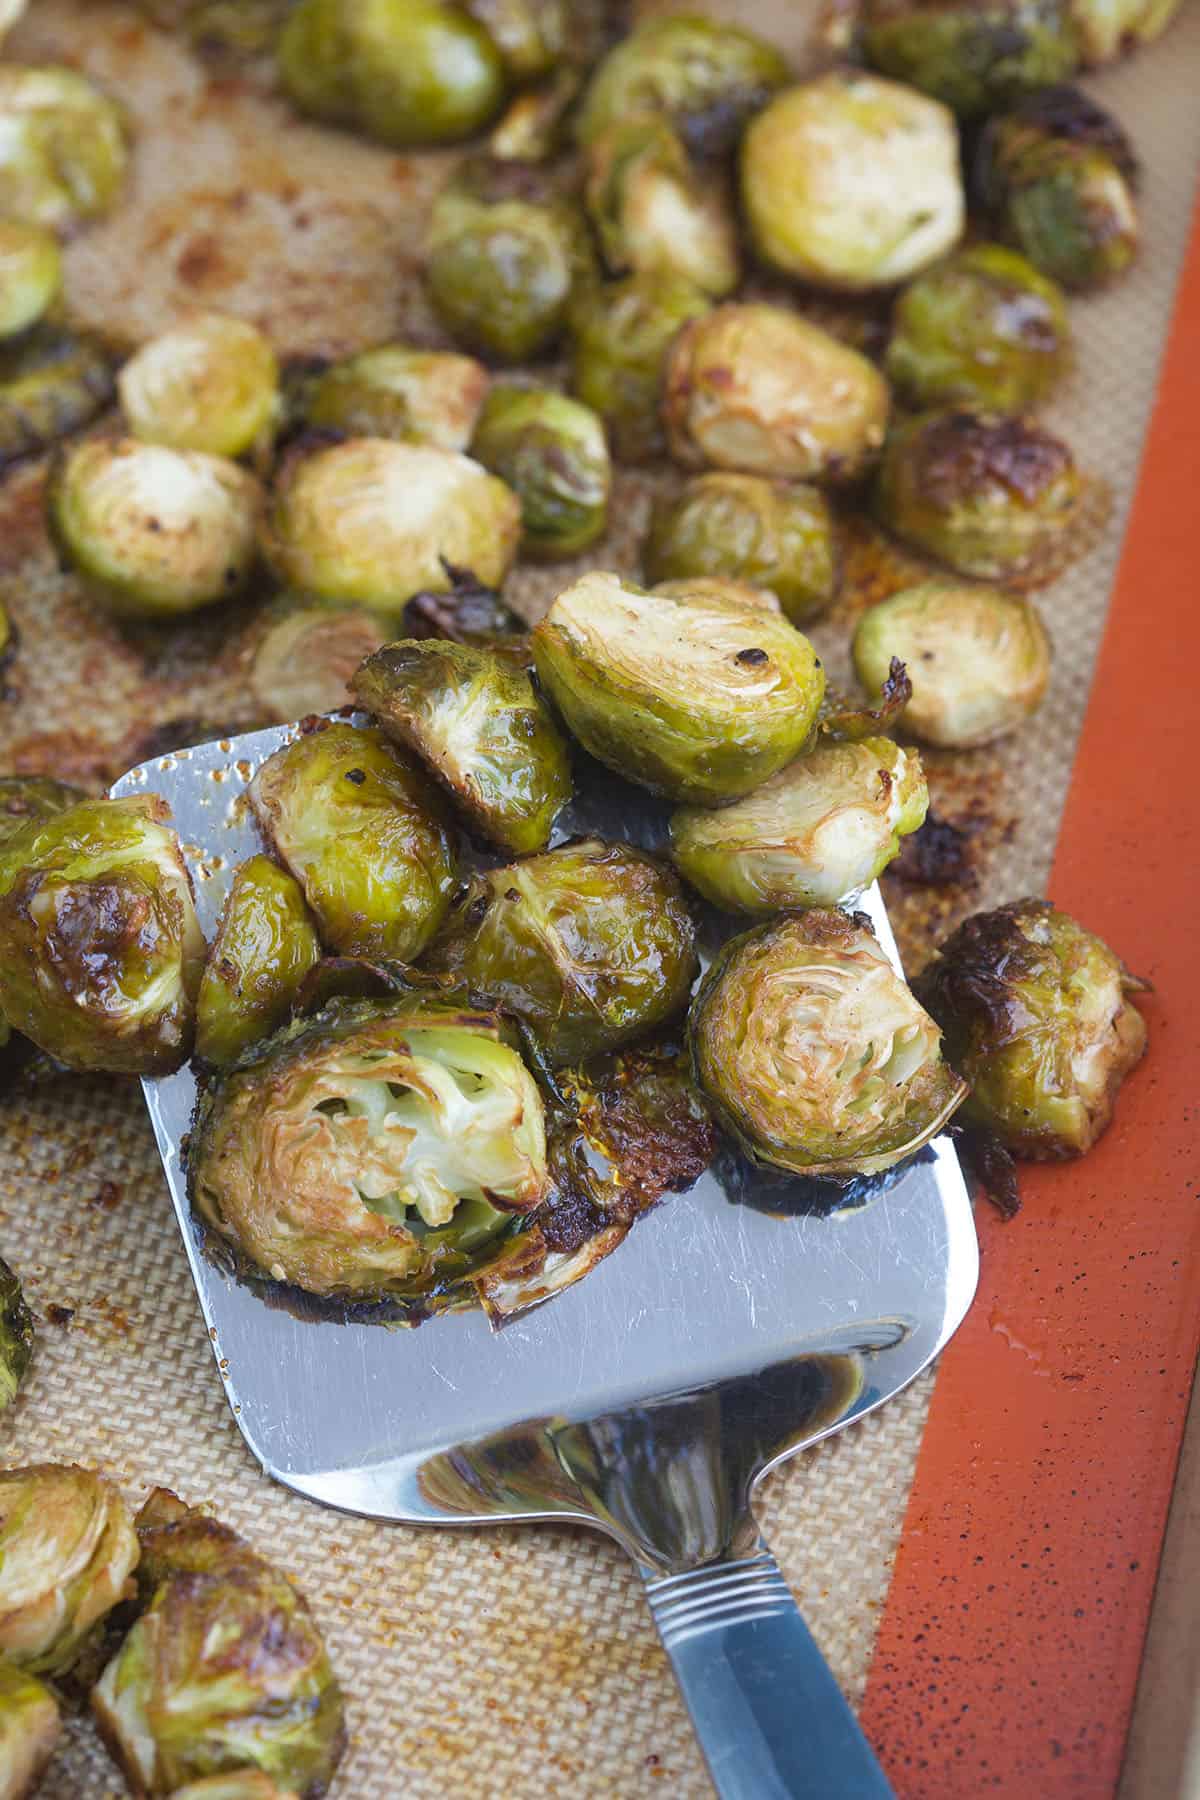 Brussel sprouts are being slightly lifted from the baking sheet with a metal spatula. 